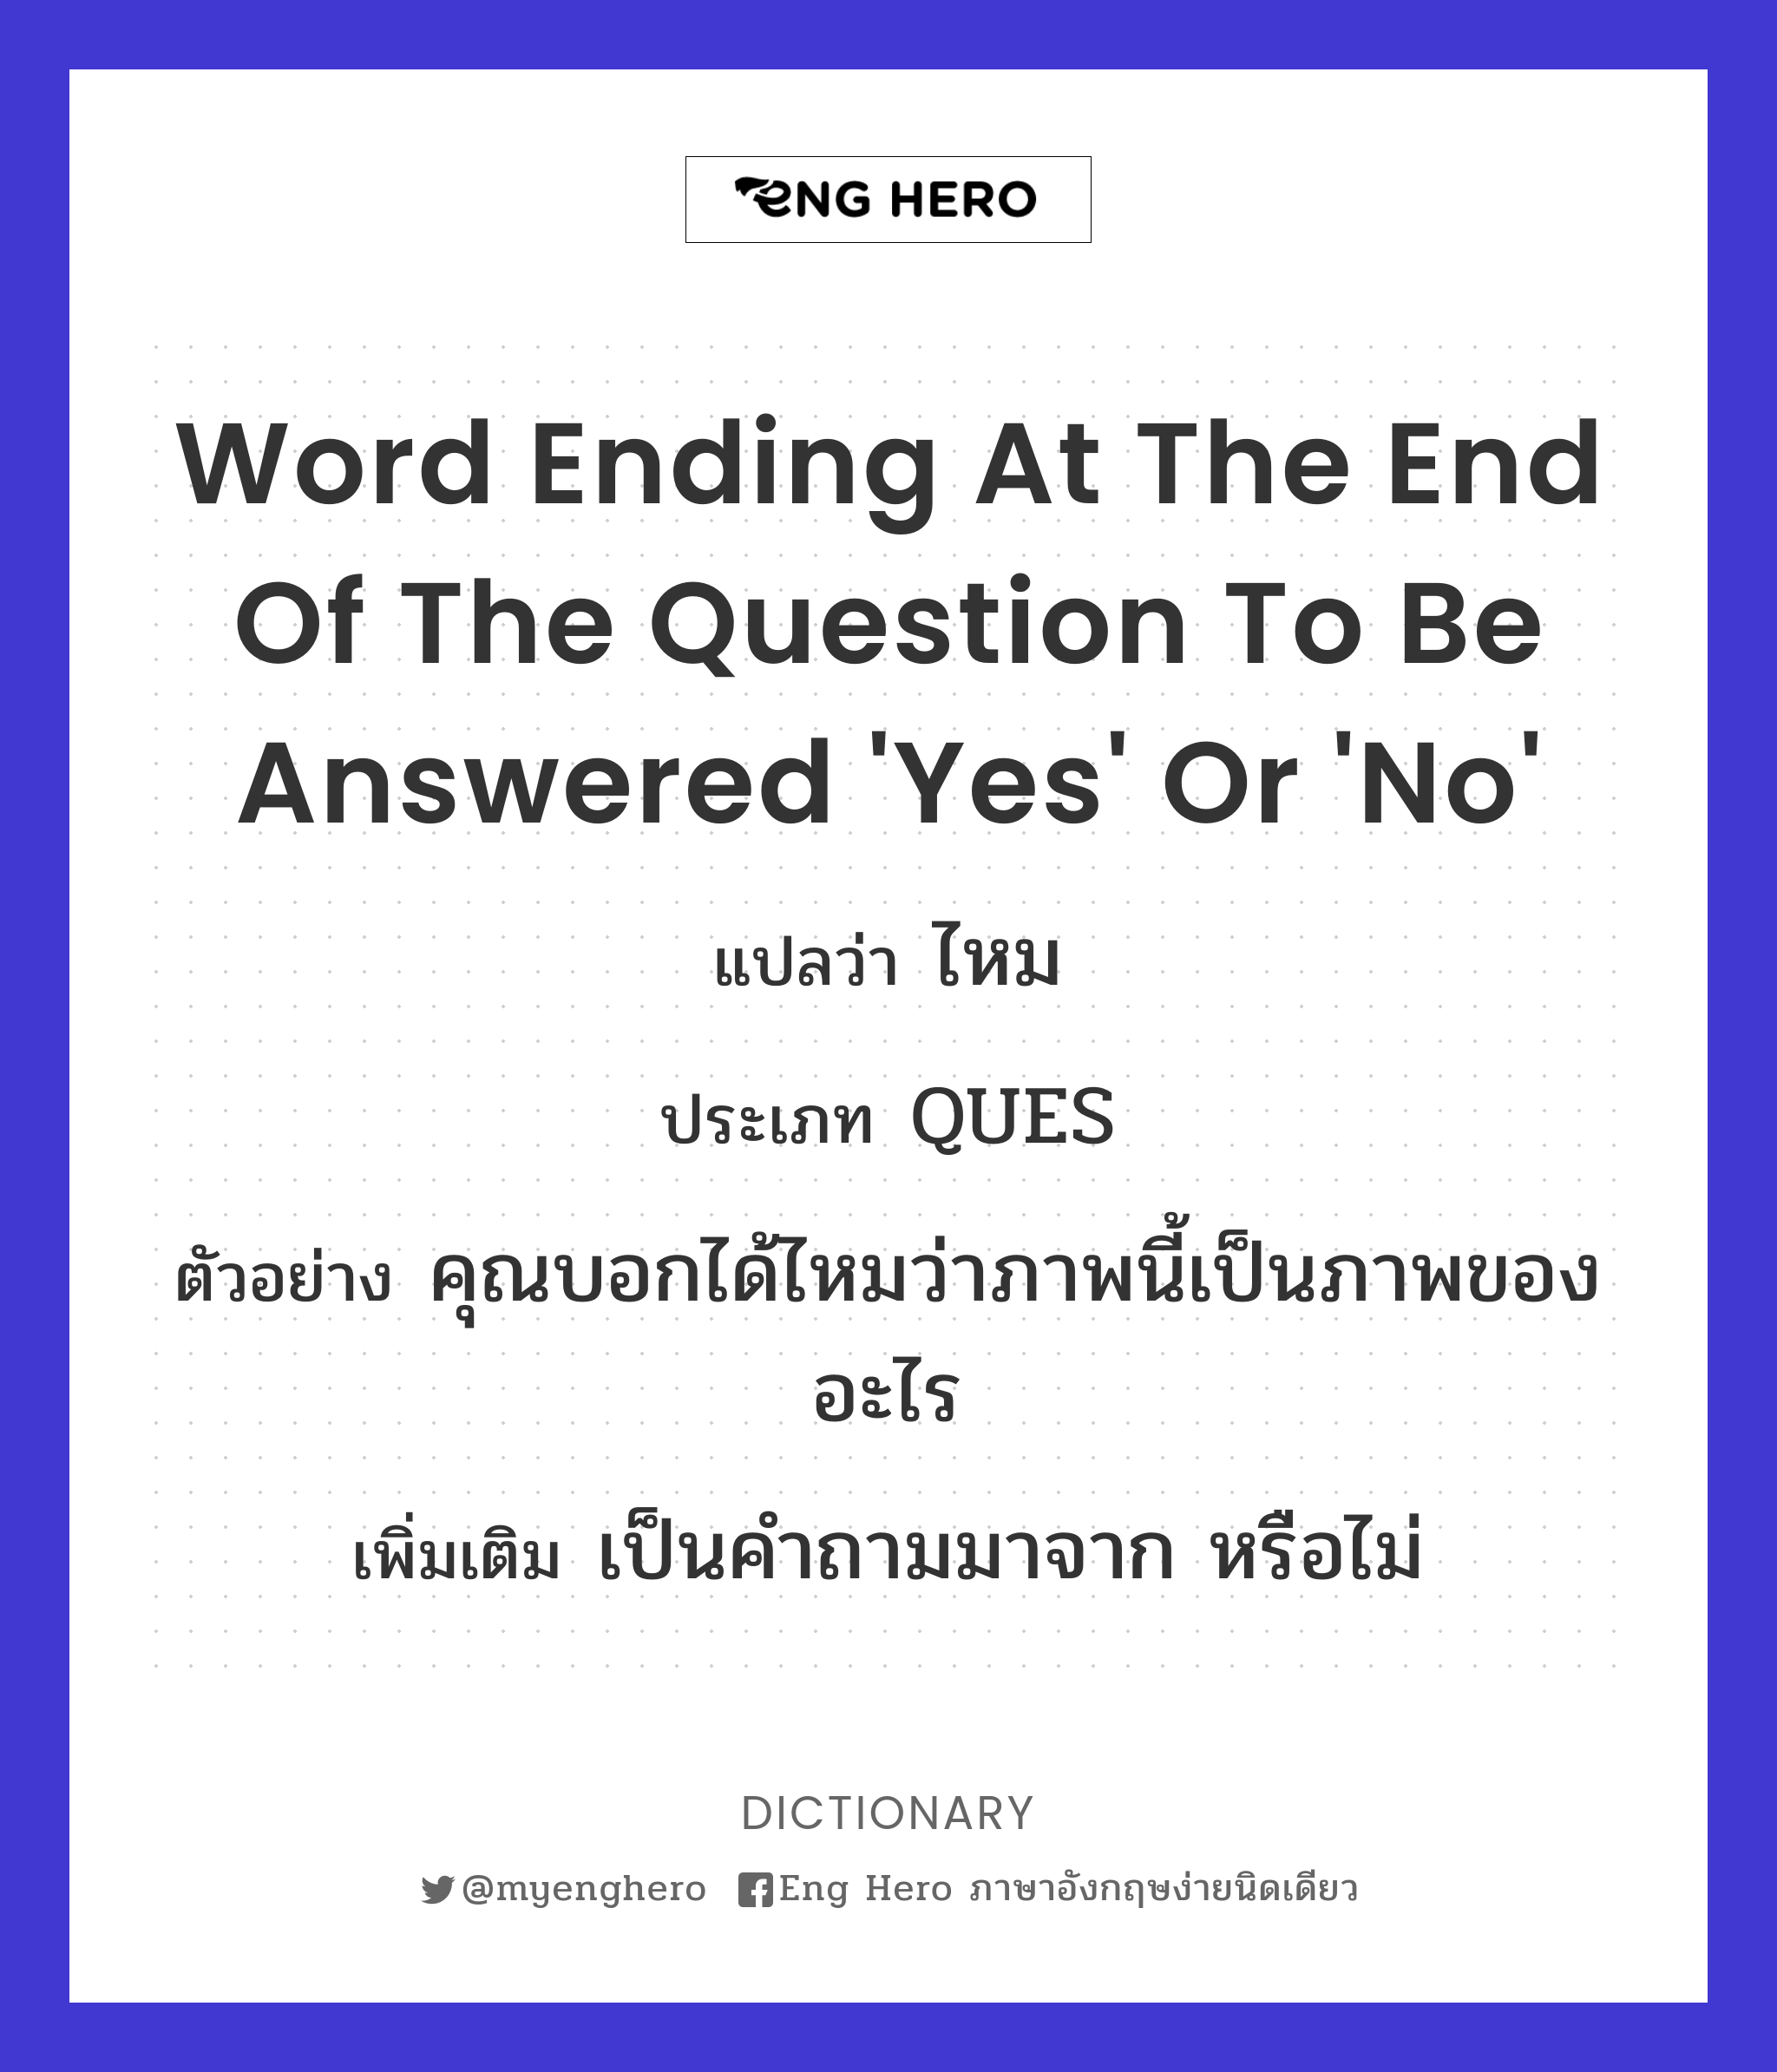 word ending at the end of the question to be answered 'Yes' or 'No'